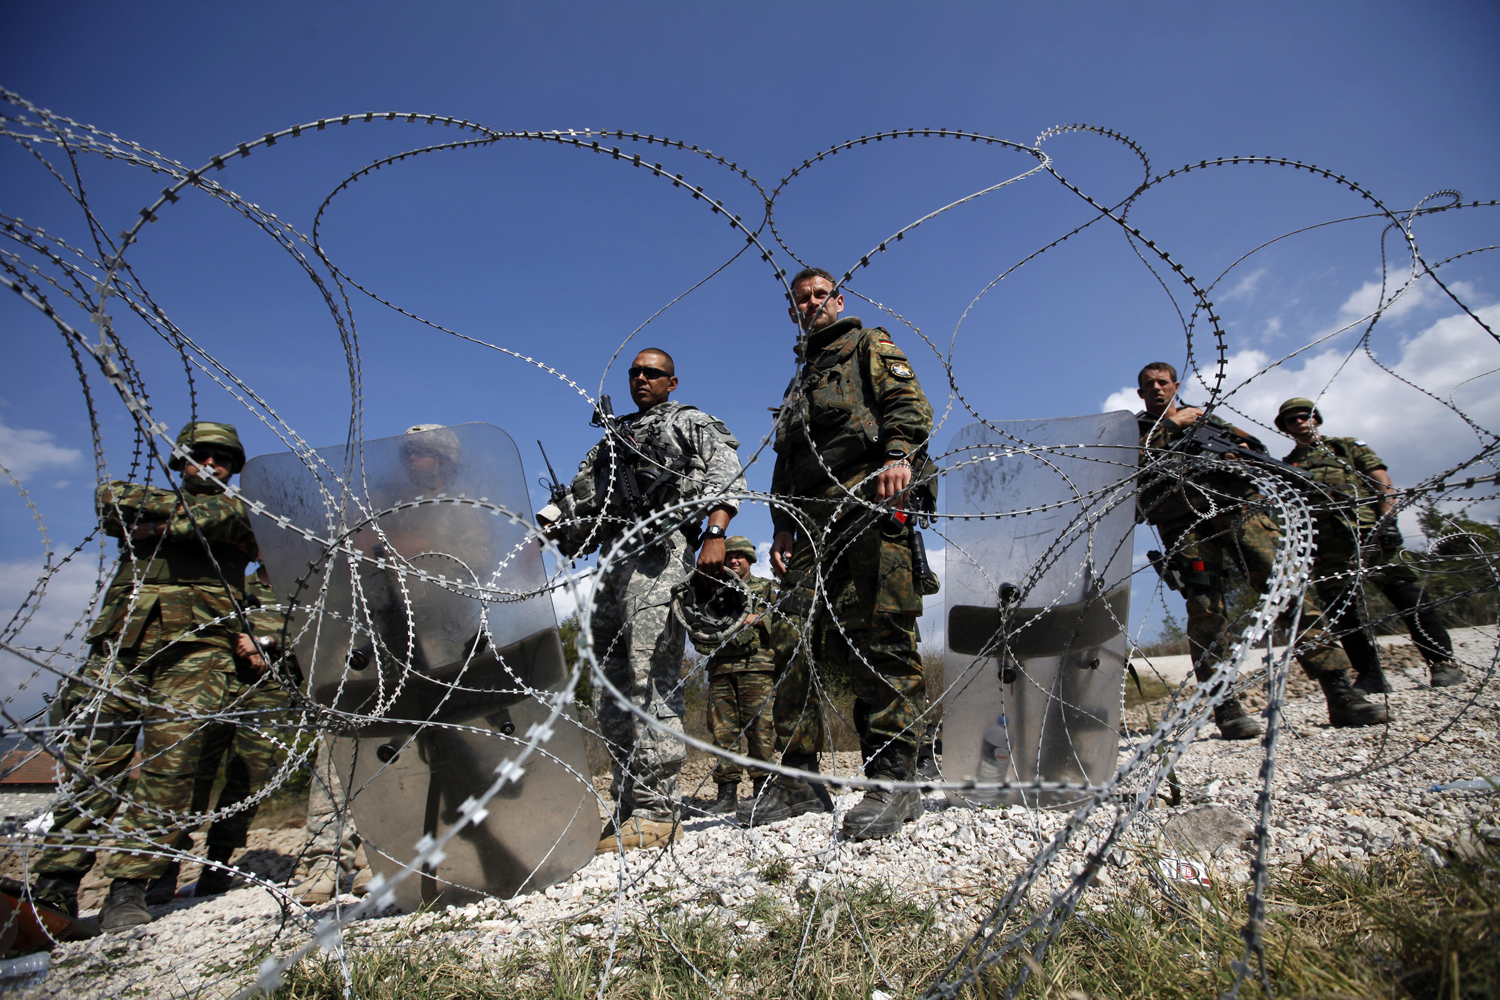 Kosovo Force (KFOR) soldiers from Greece, Germany and the U.S. stand guard at the closed Serbia-Kosovo border crossing of Jarinje